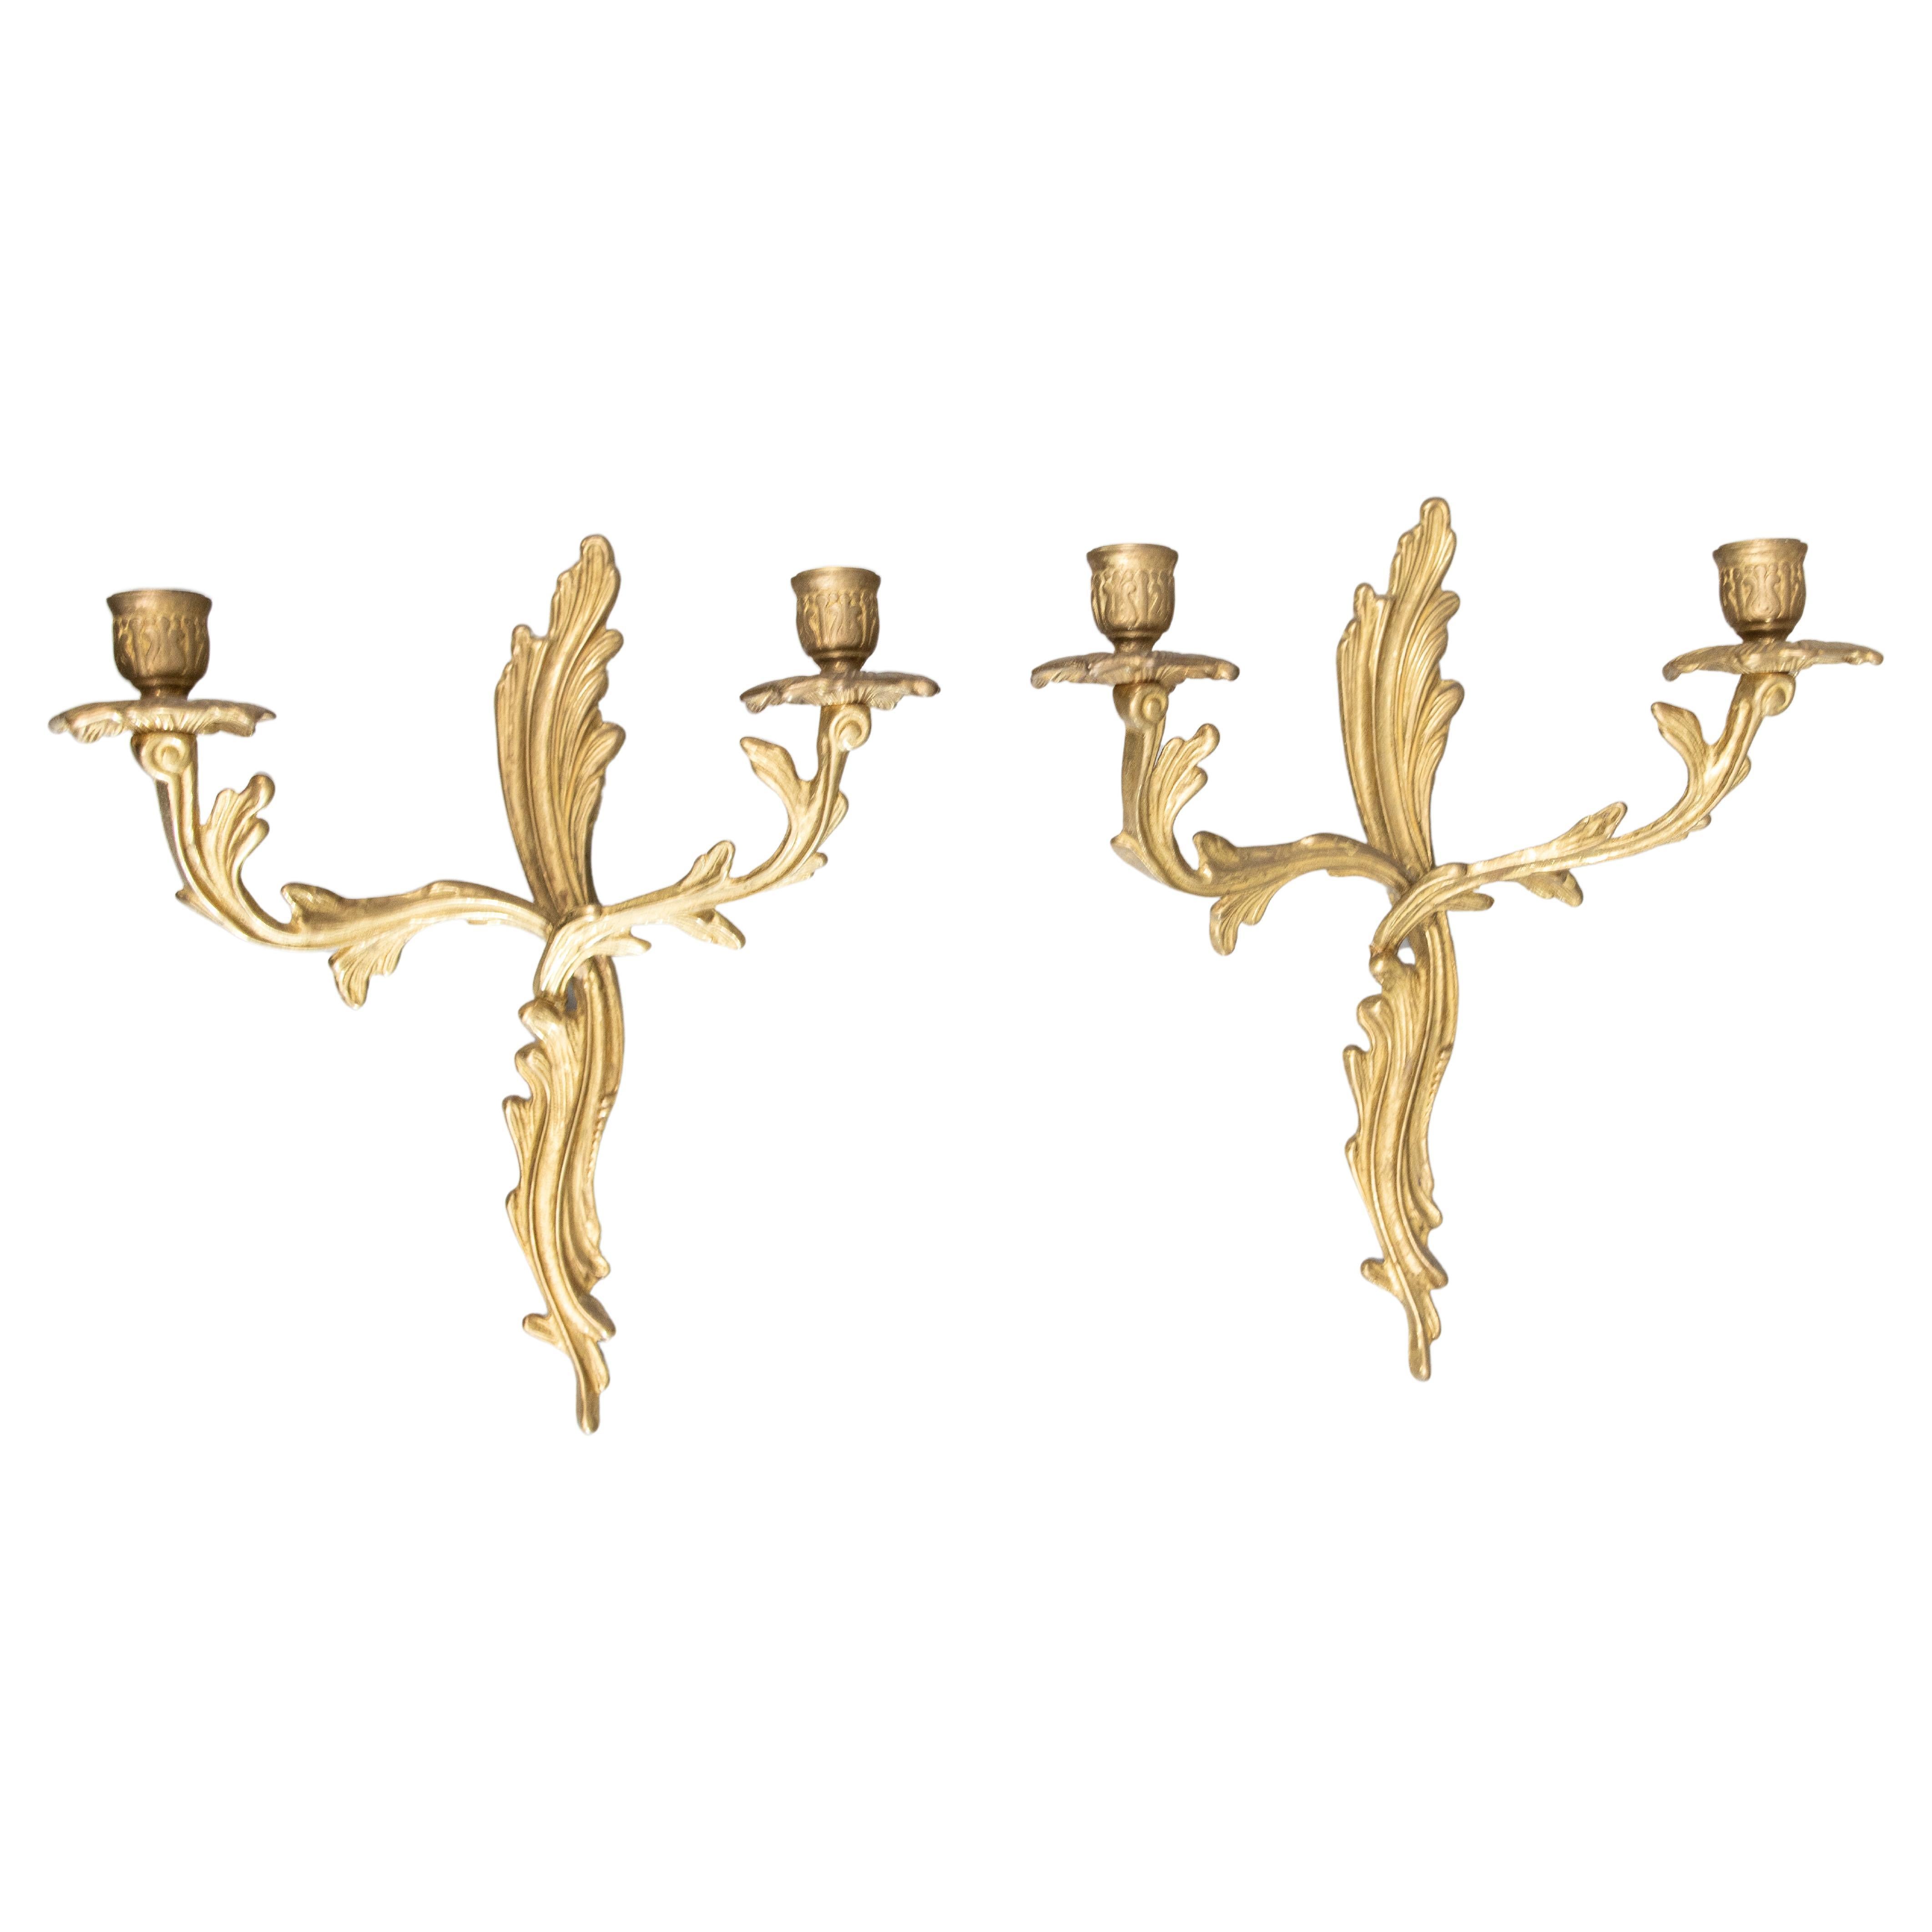 Pair of Antique French Rococo Style Gilt Brass Candelabras Wall Candle Sconces